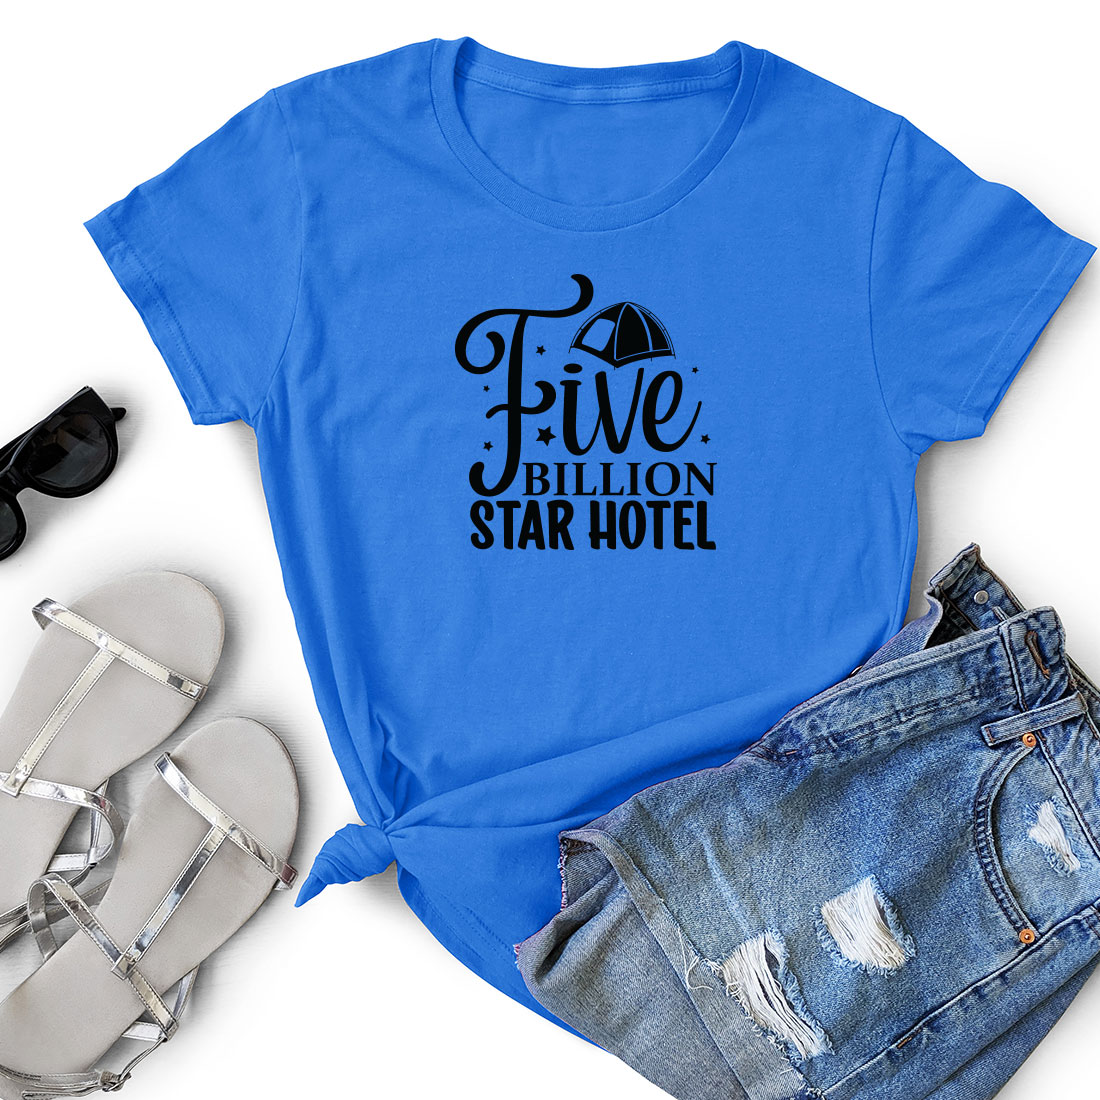 Blue t - shirt that says five billion star hotel next to a pair of.